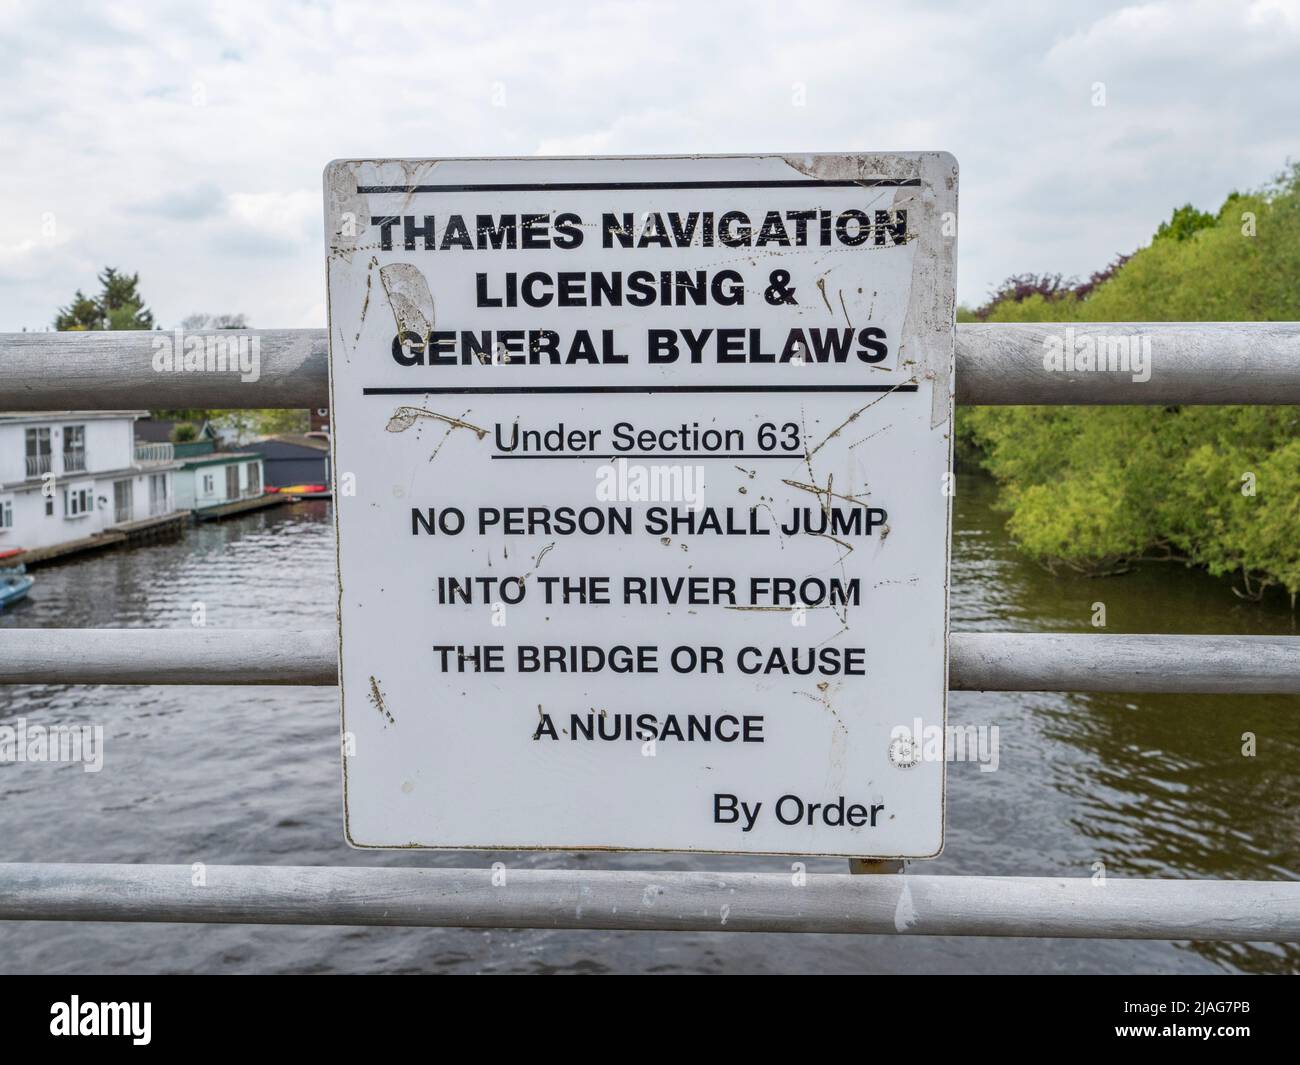 'No person shall jump into the river' sign on the bridge to Tagg's Island, Richmond upon Thames, an island on the River Thames, London, UK. Stock Photo